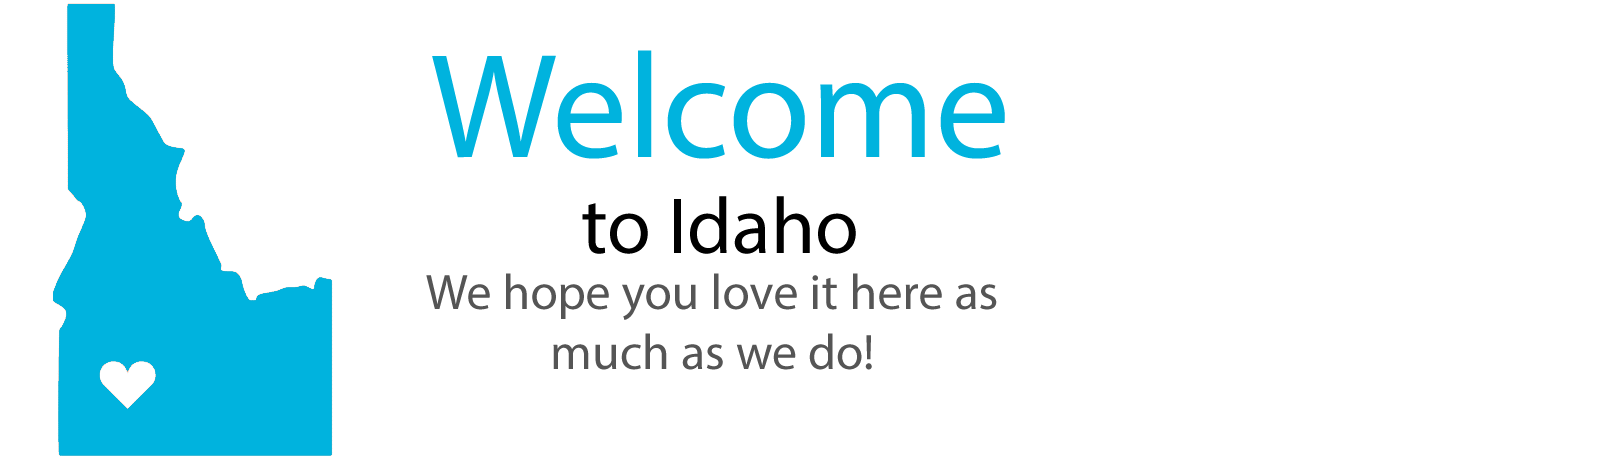 Idaho! I hope you love it here as much as we do.